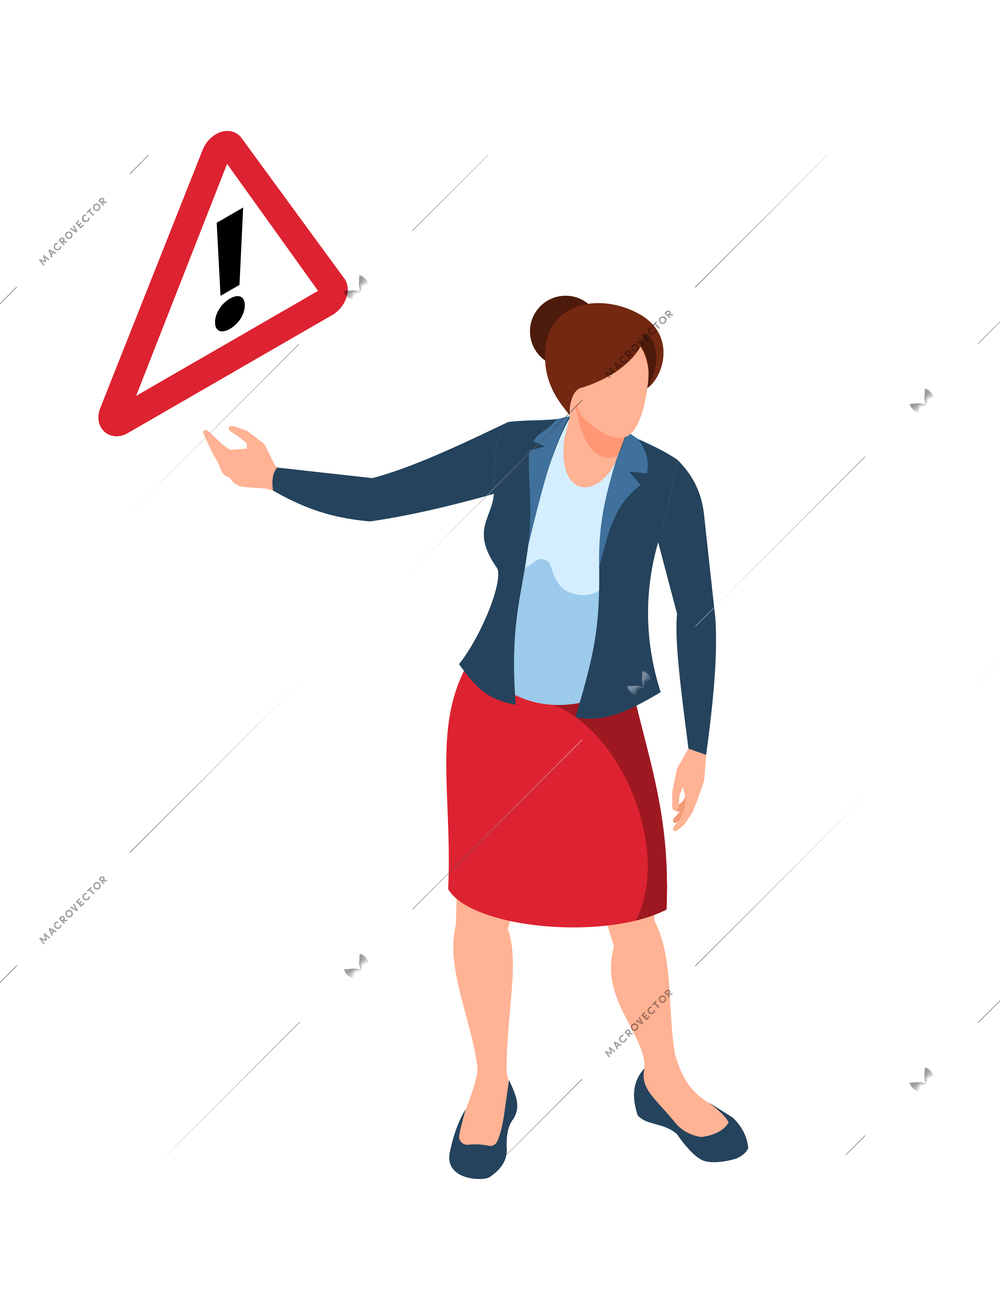 Isometric female character of driving instructor and warning road sign 3d vector illustration